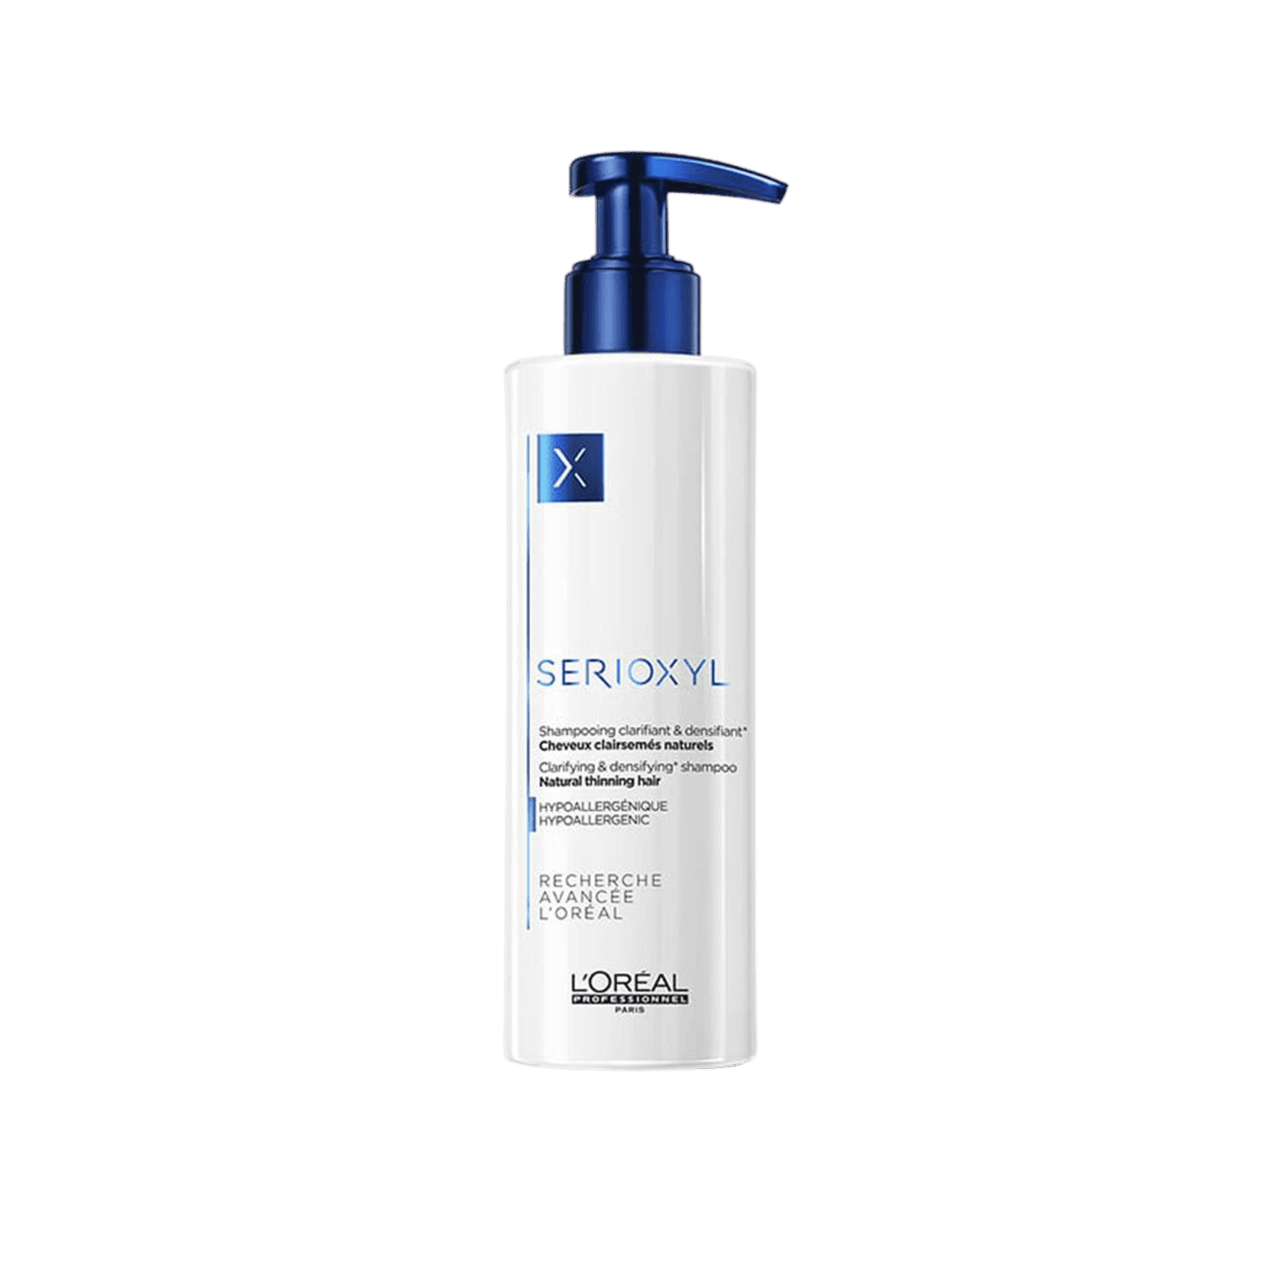 A bottle of L'Oréal Professionnel Serioxyl Natural Hair Shampoo with a pump dispenser, isolated on a plain background. This hypoallergenic formula cleanses the scalp effectively.